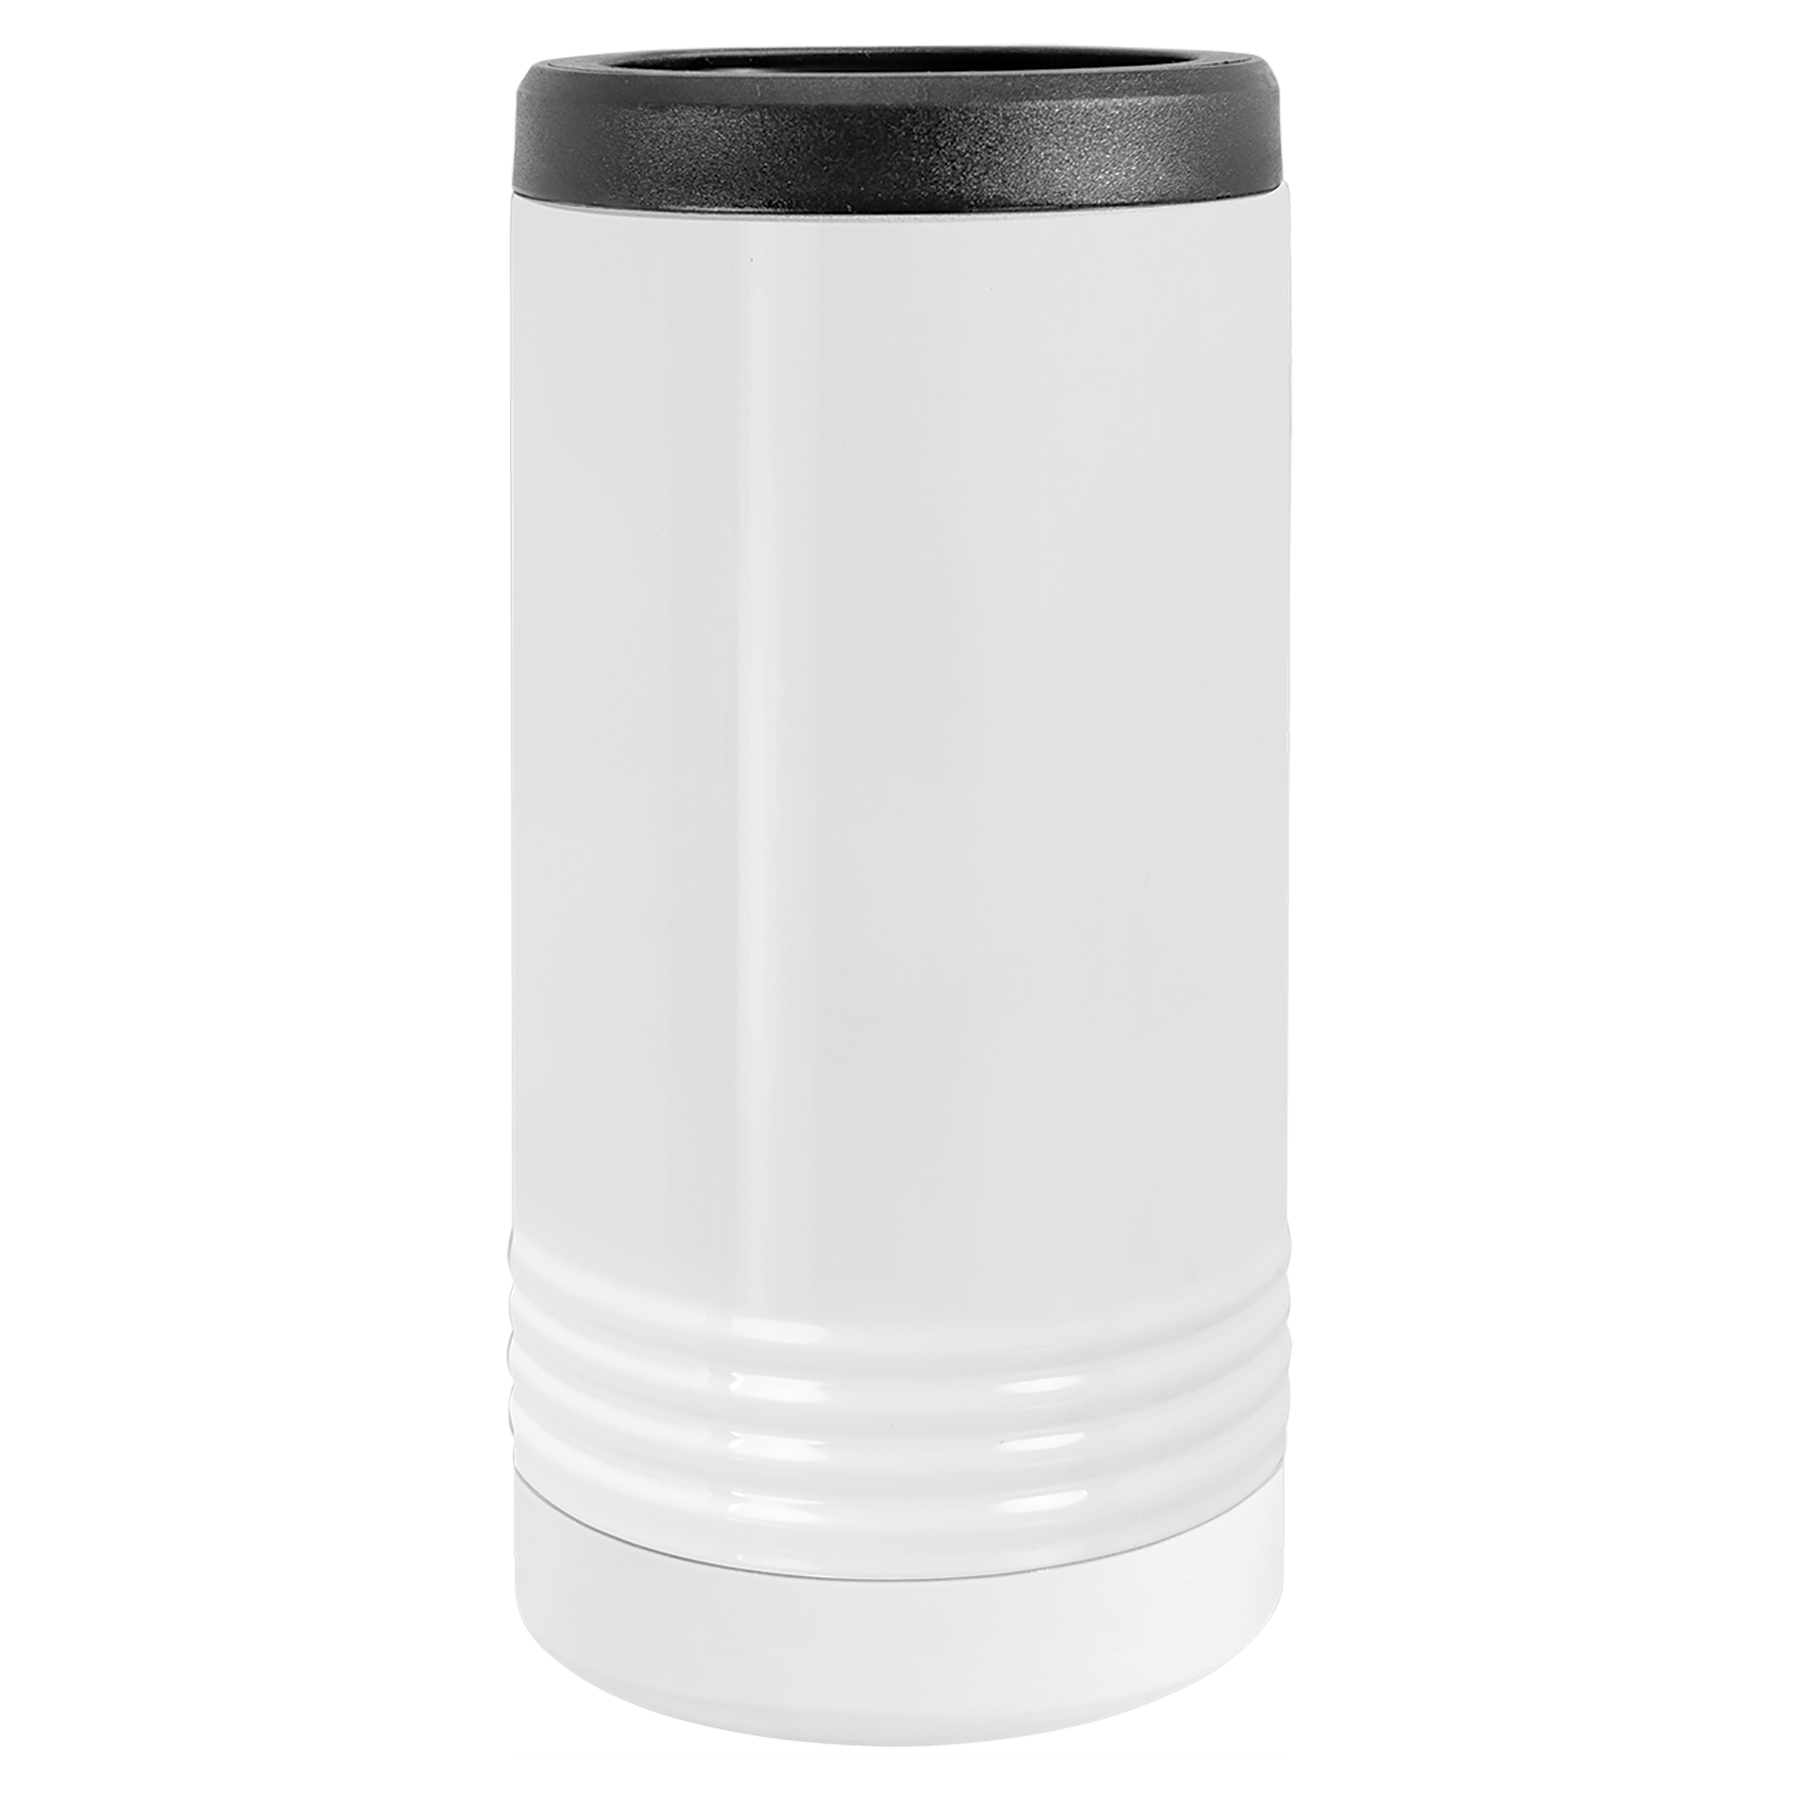 Cylinder Container, Hobby Lobby